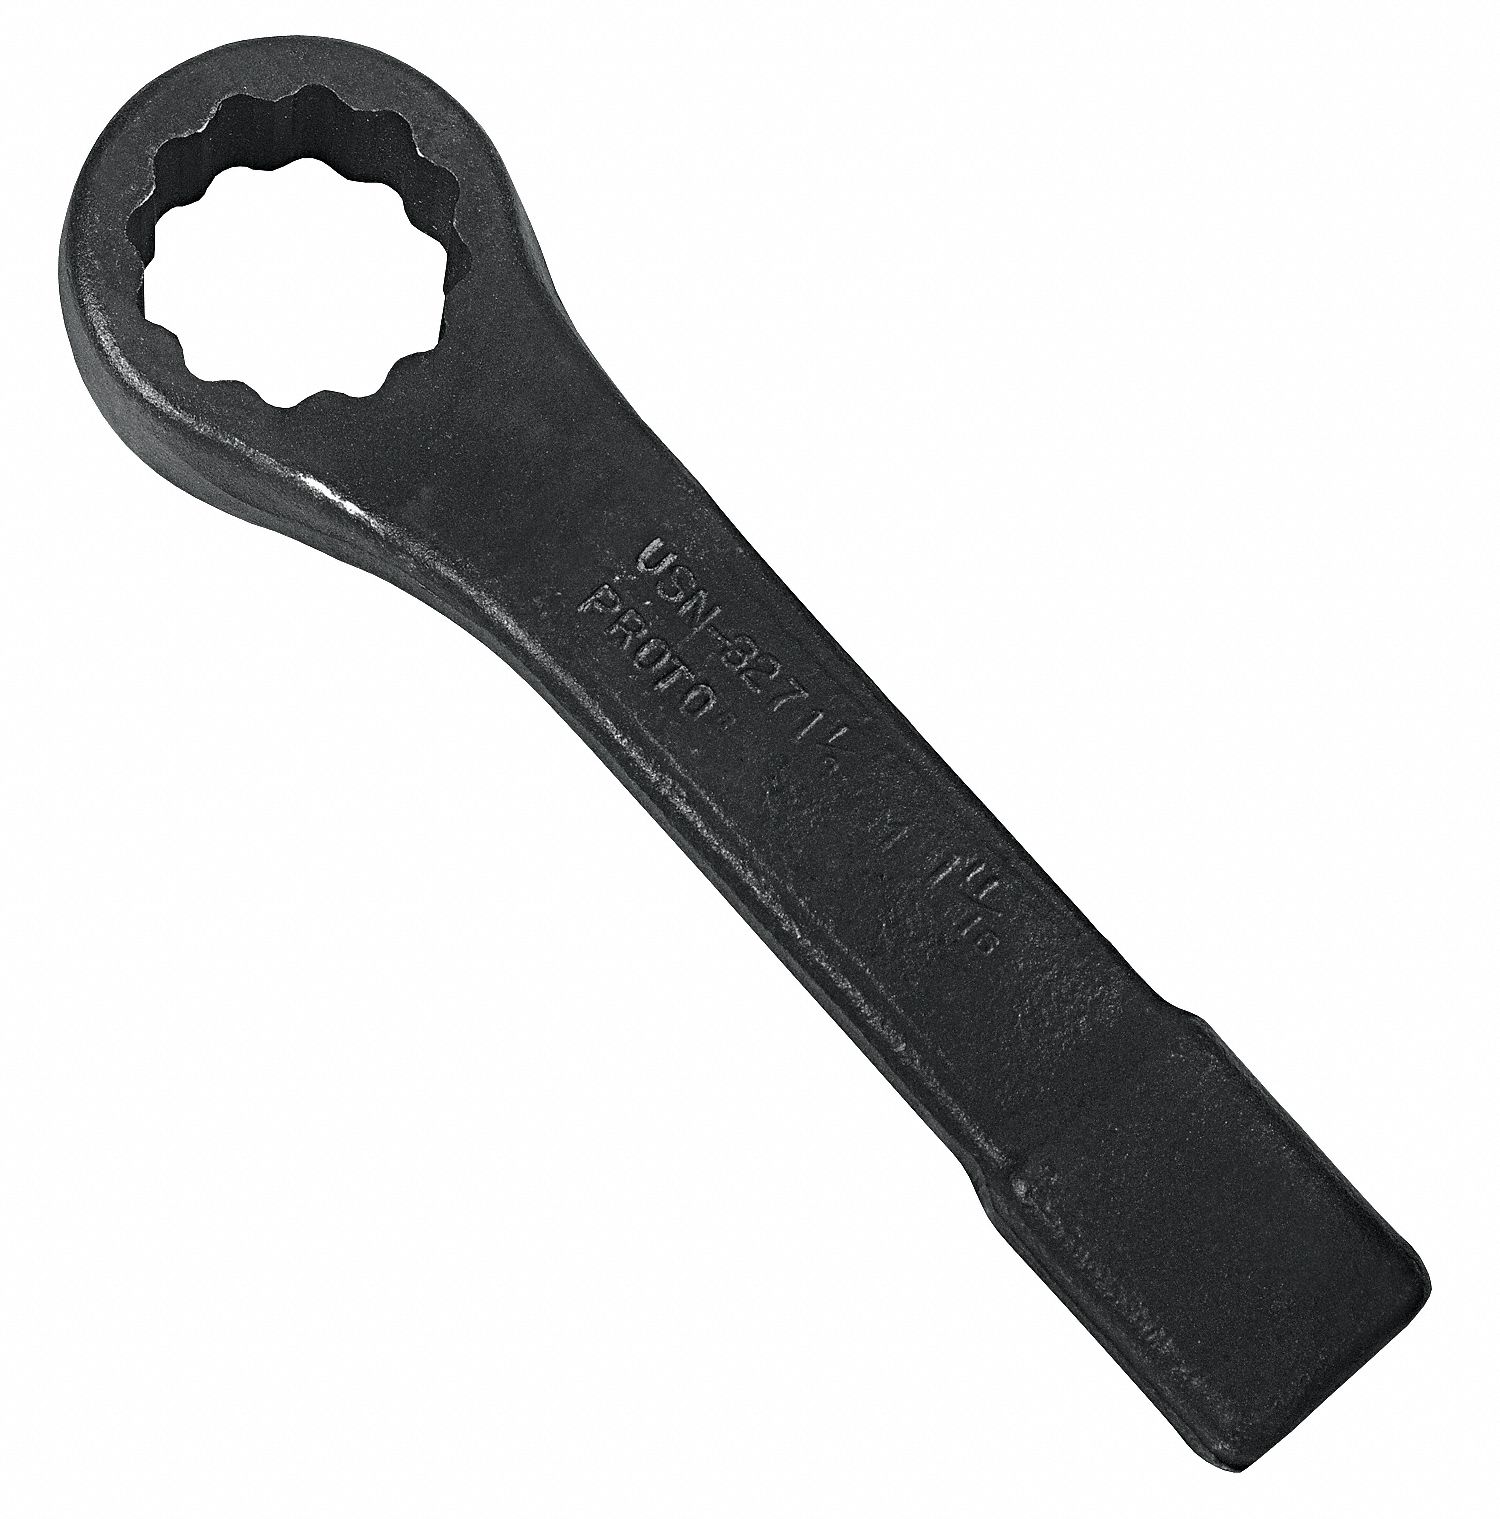 19C607 - Slugging Wrench Offset 1-3/4 in. 10-1/8L